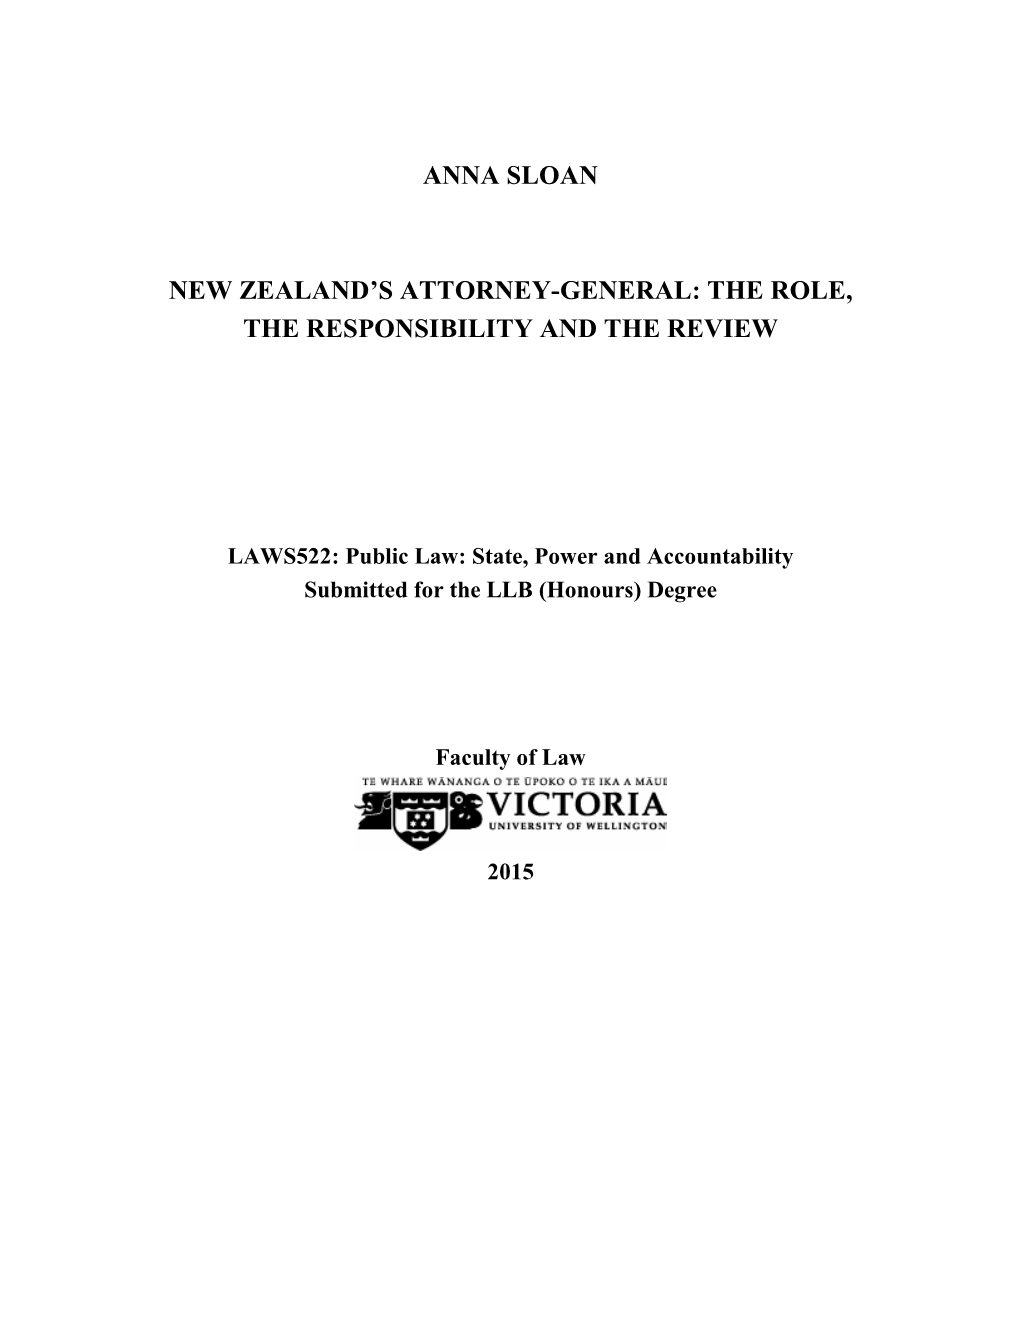 Anna Sloan New Zealand's Attorney-General: the Role